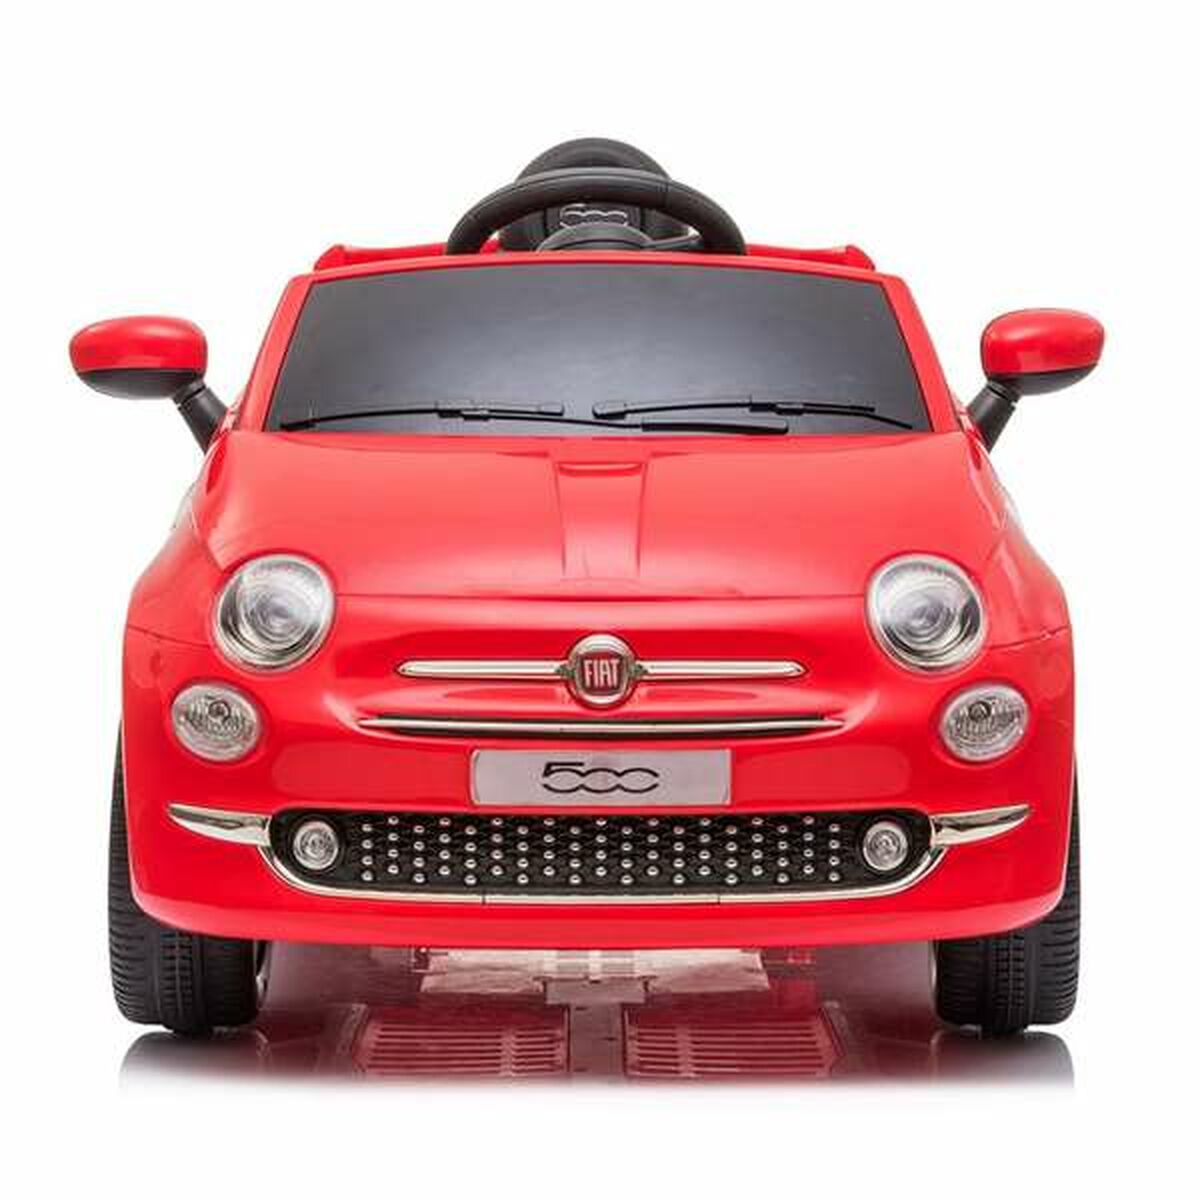 Children's Electric Car Fiat 500 Red With remote control MP3 30 W 6 V 113 x 67,5 x 53 cm